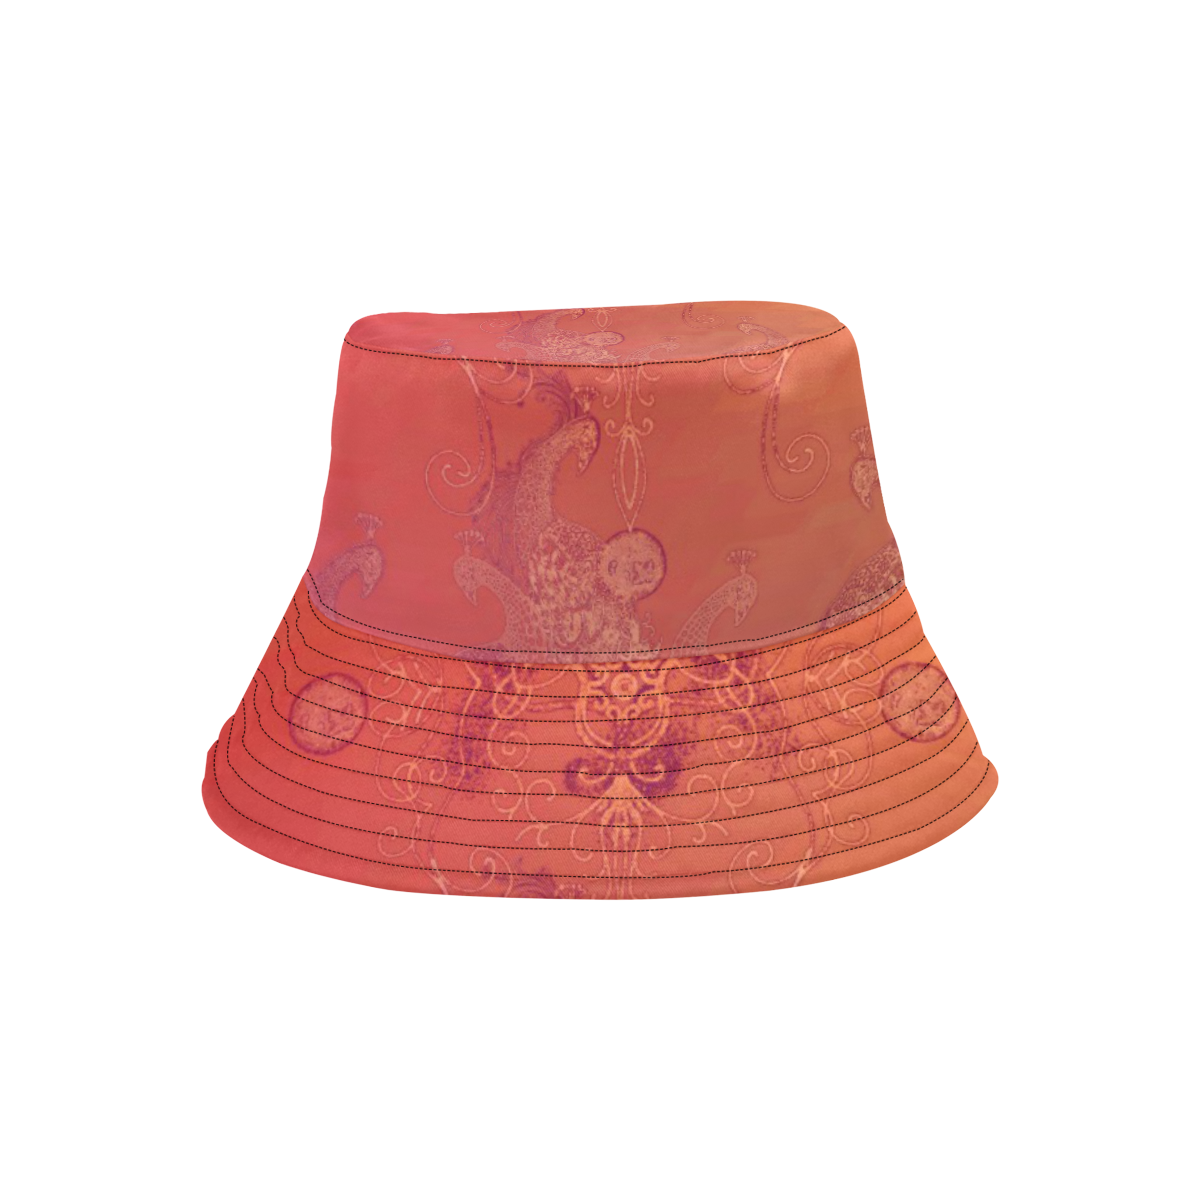 peacocq parade 20 All Over Print Bucket Hat for Men